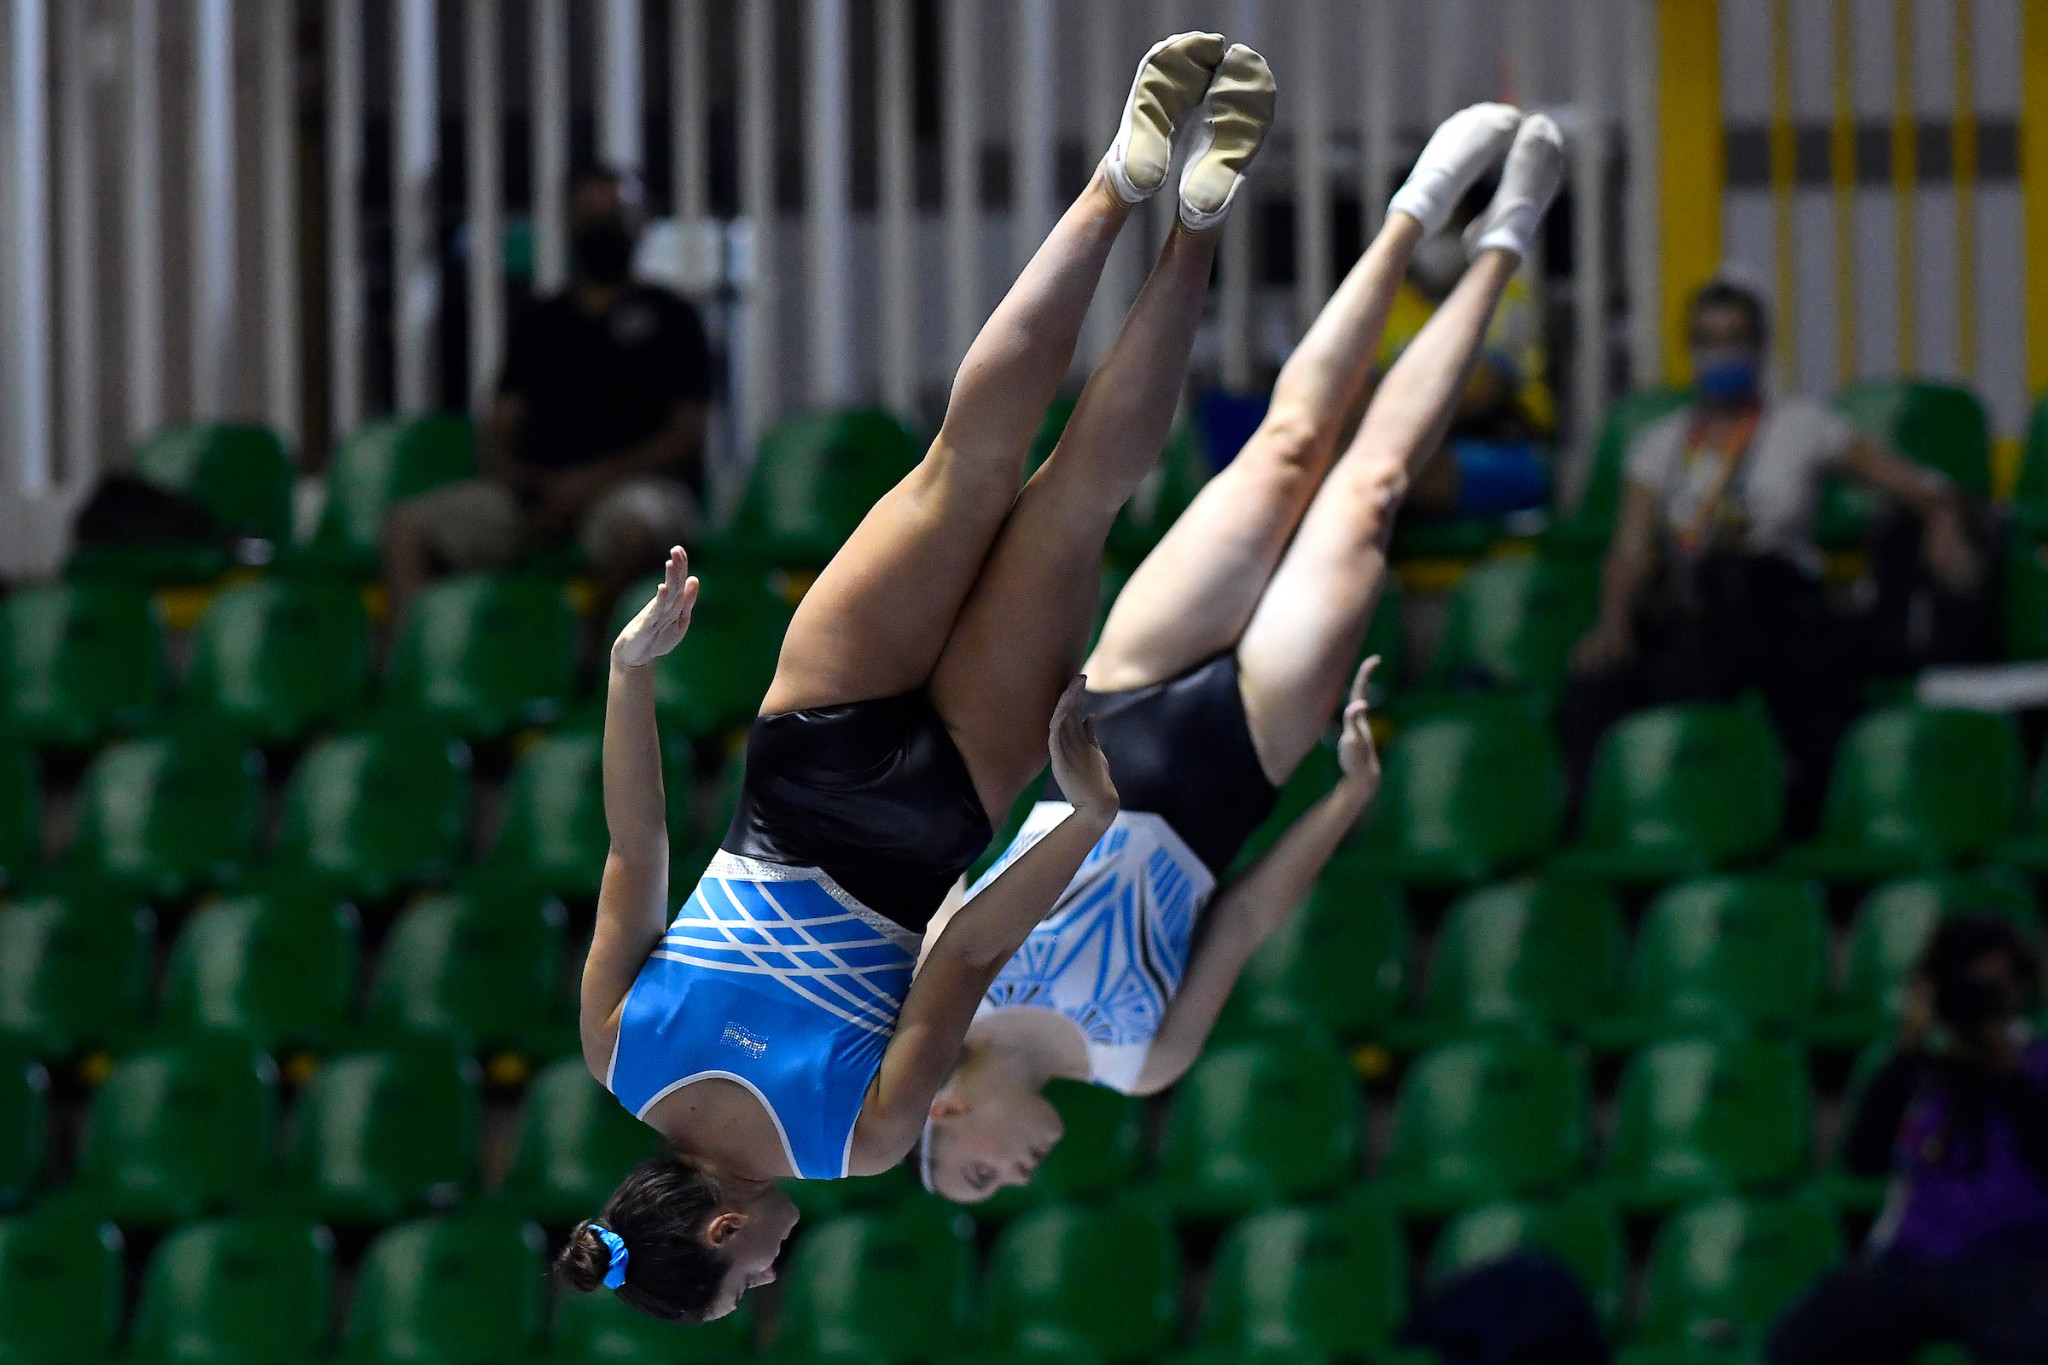 A score of 44.43 was enough for Argentina to take home the women's team synchronised trampoline gymnastics gold medal ©Agencia.Xpress Media